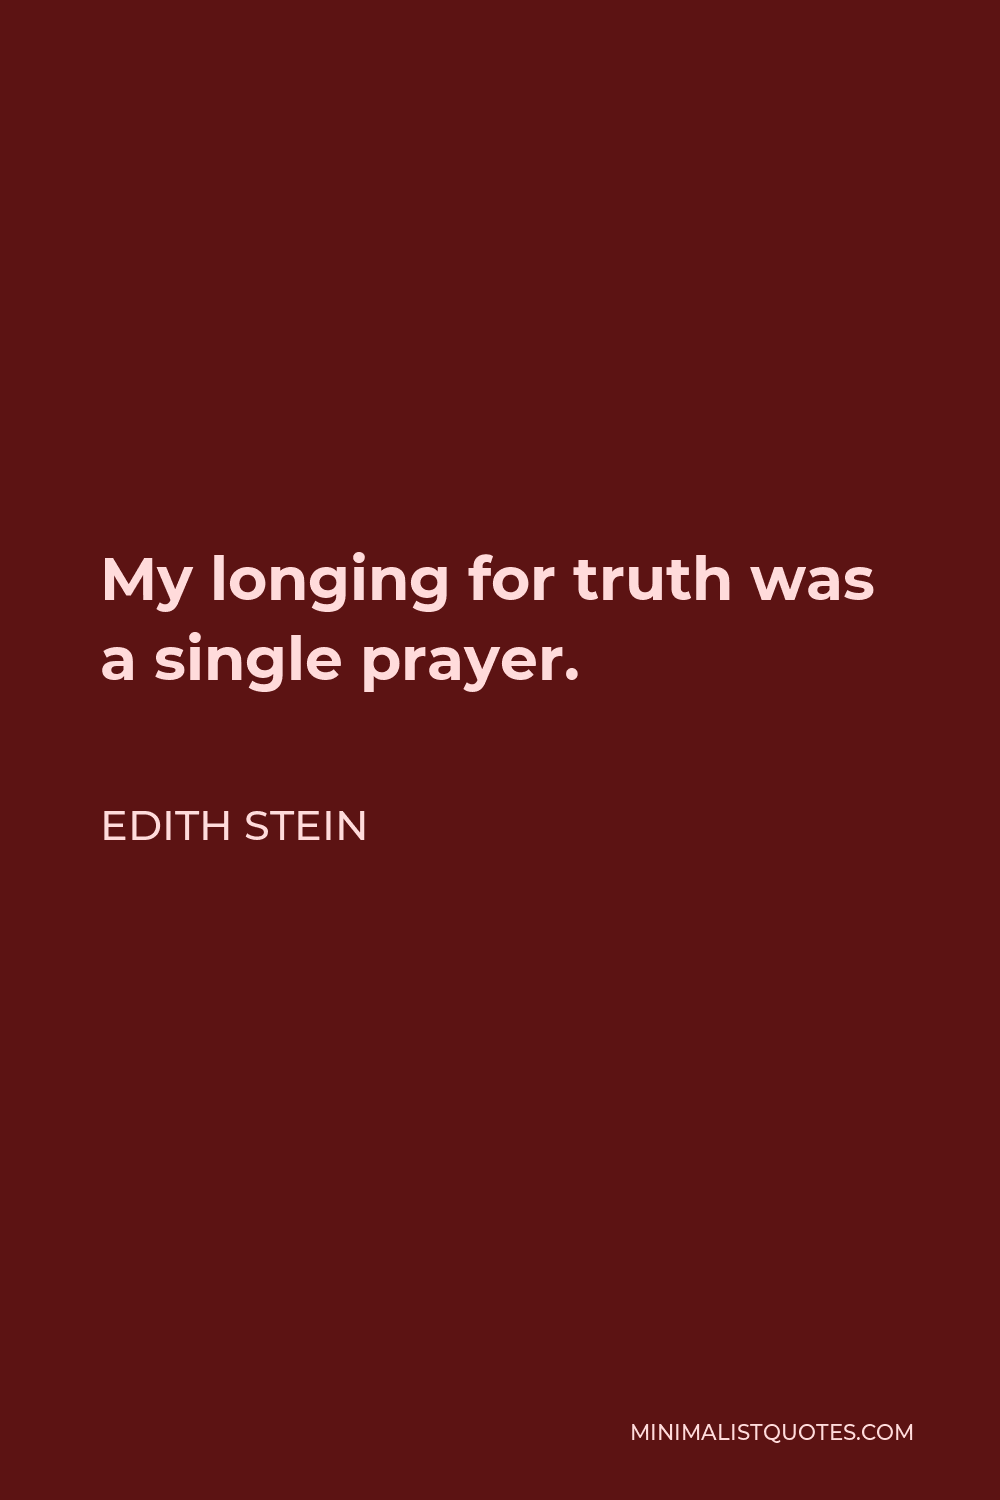 Edith Stein Quote - My longing for truth was a single prayer.